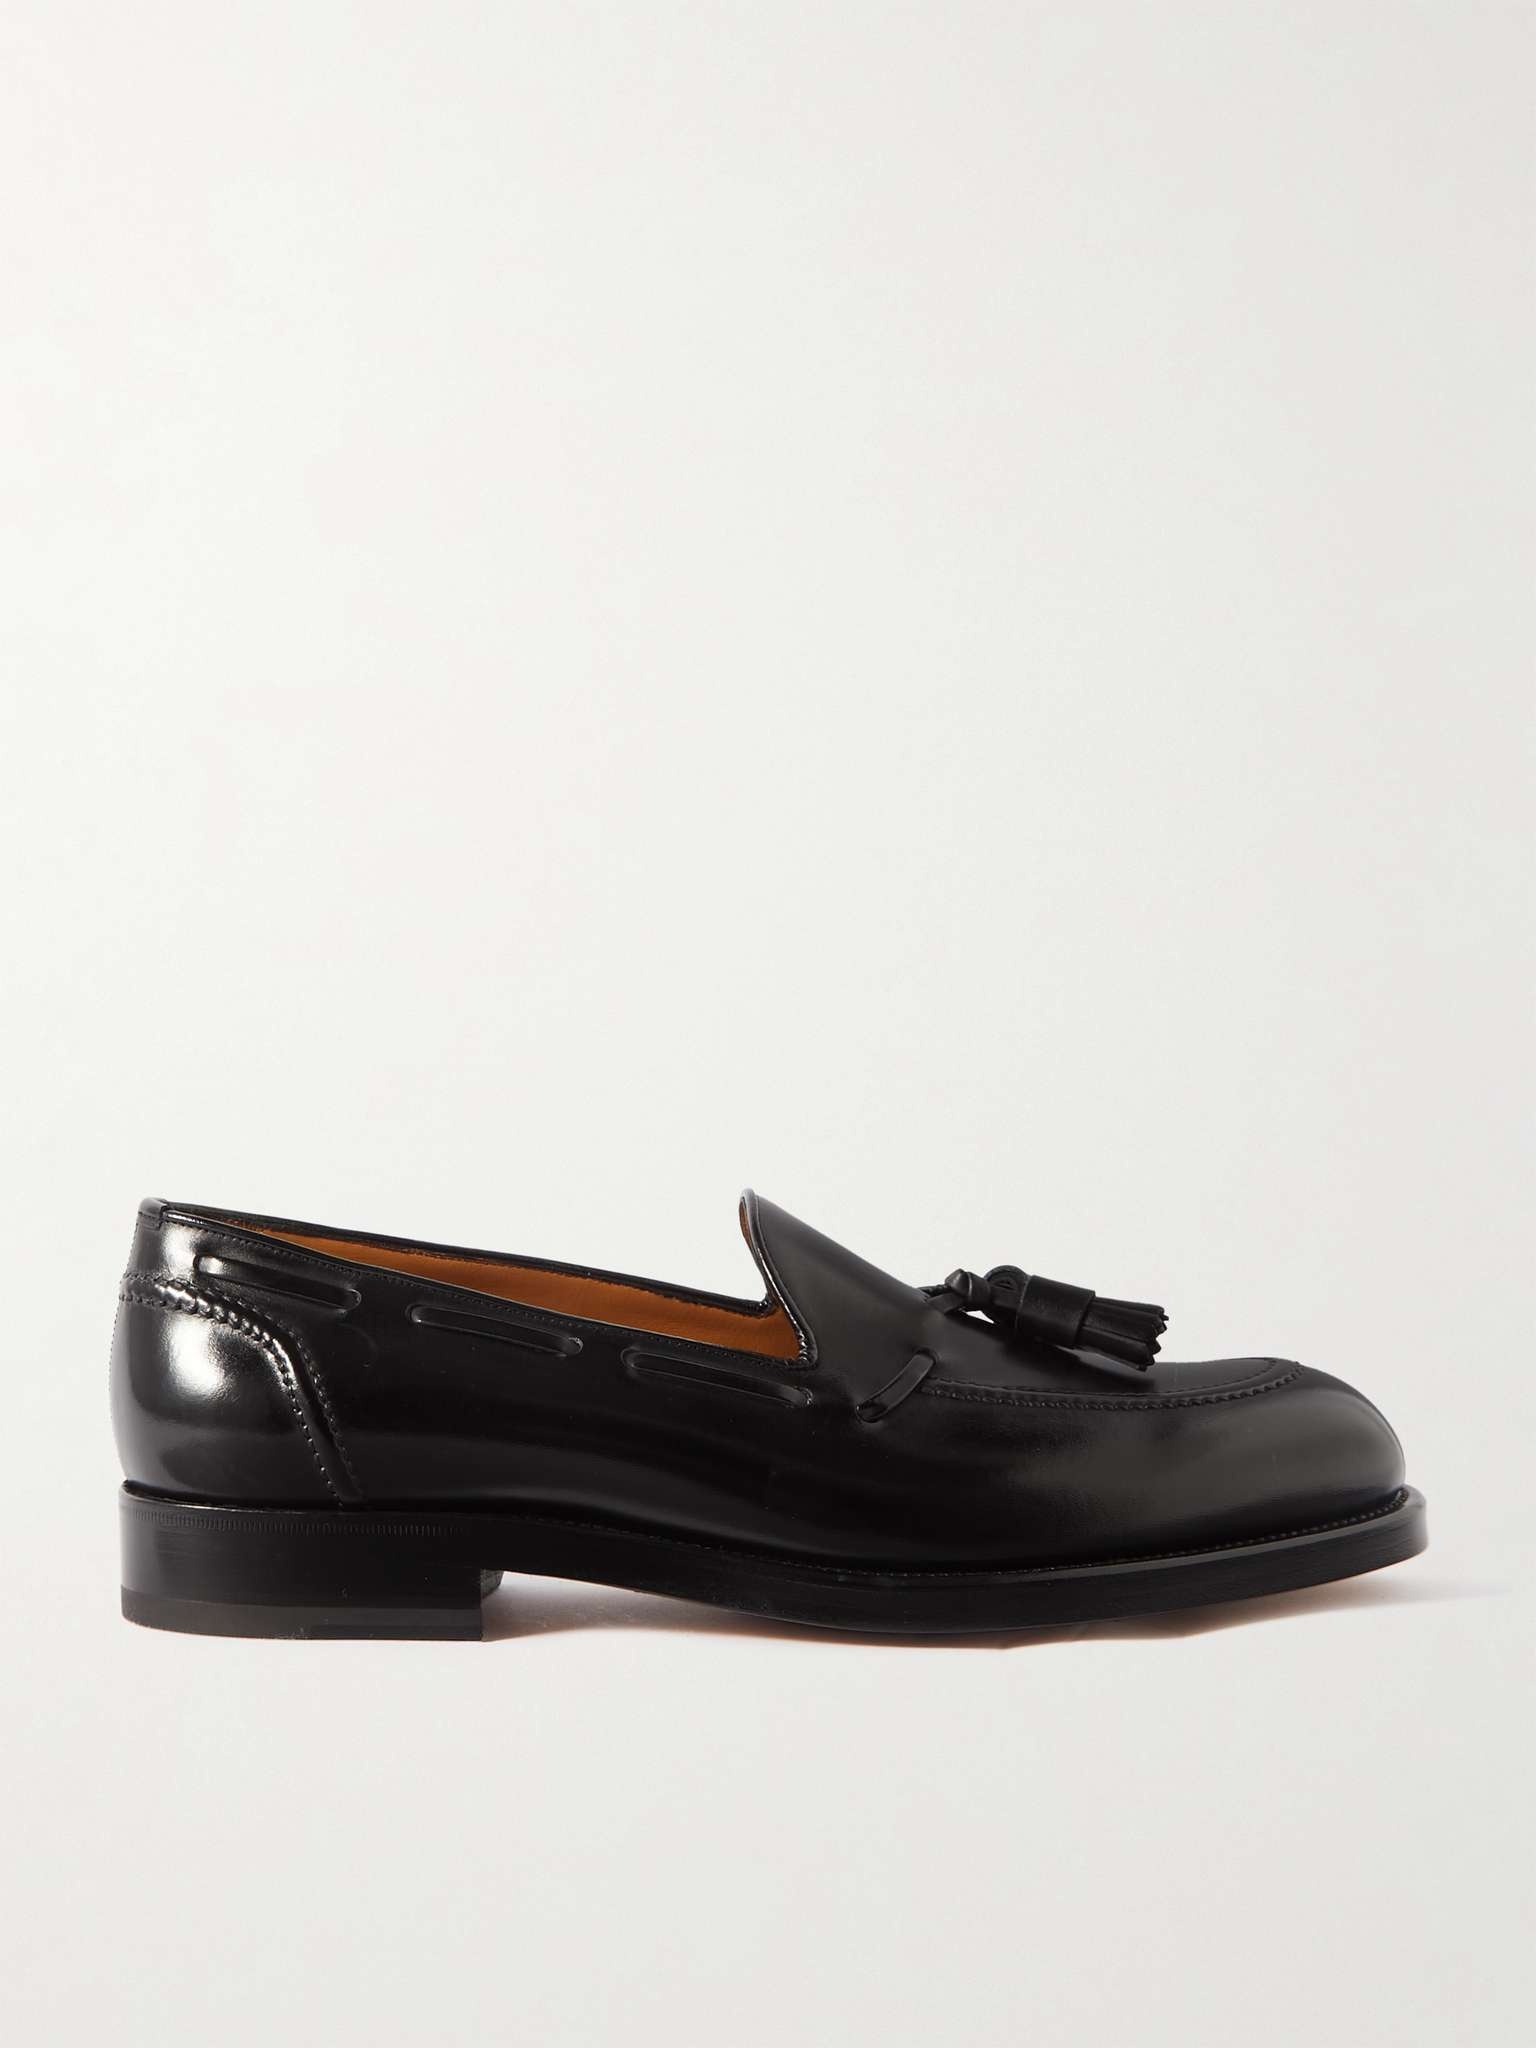 TOM FORD patent leather loafers - Black